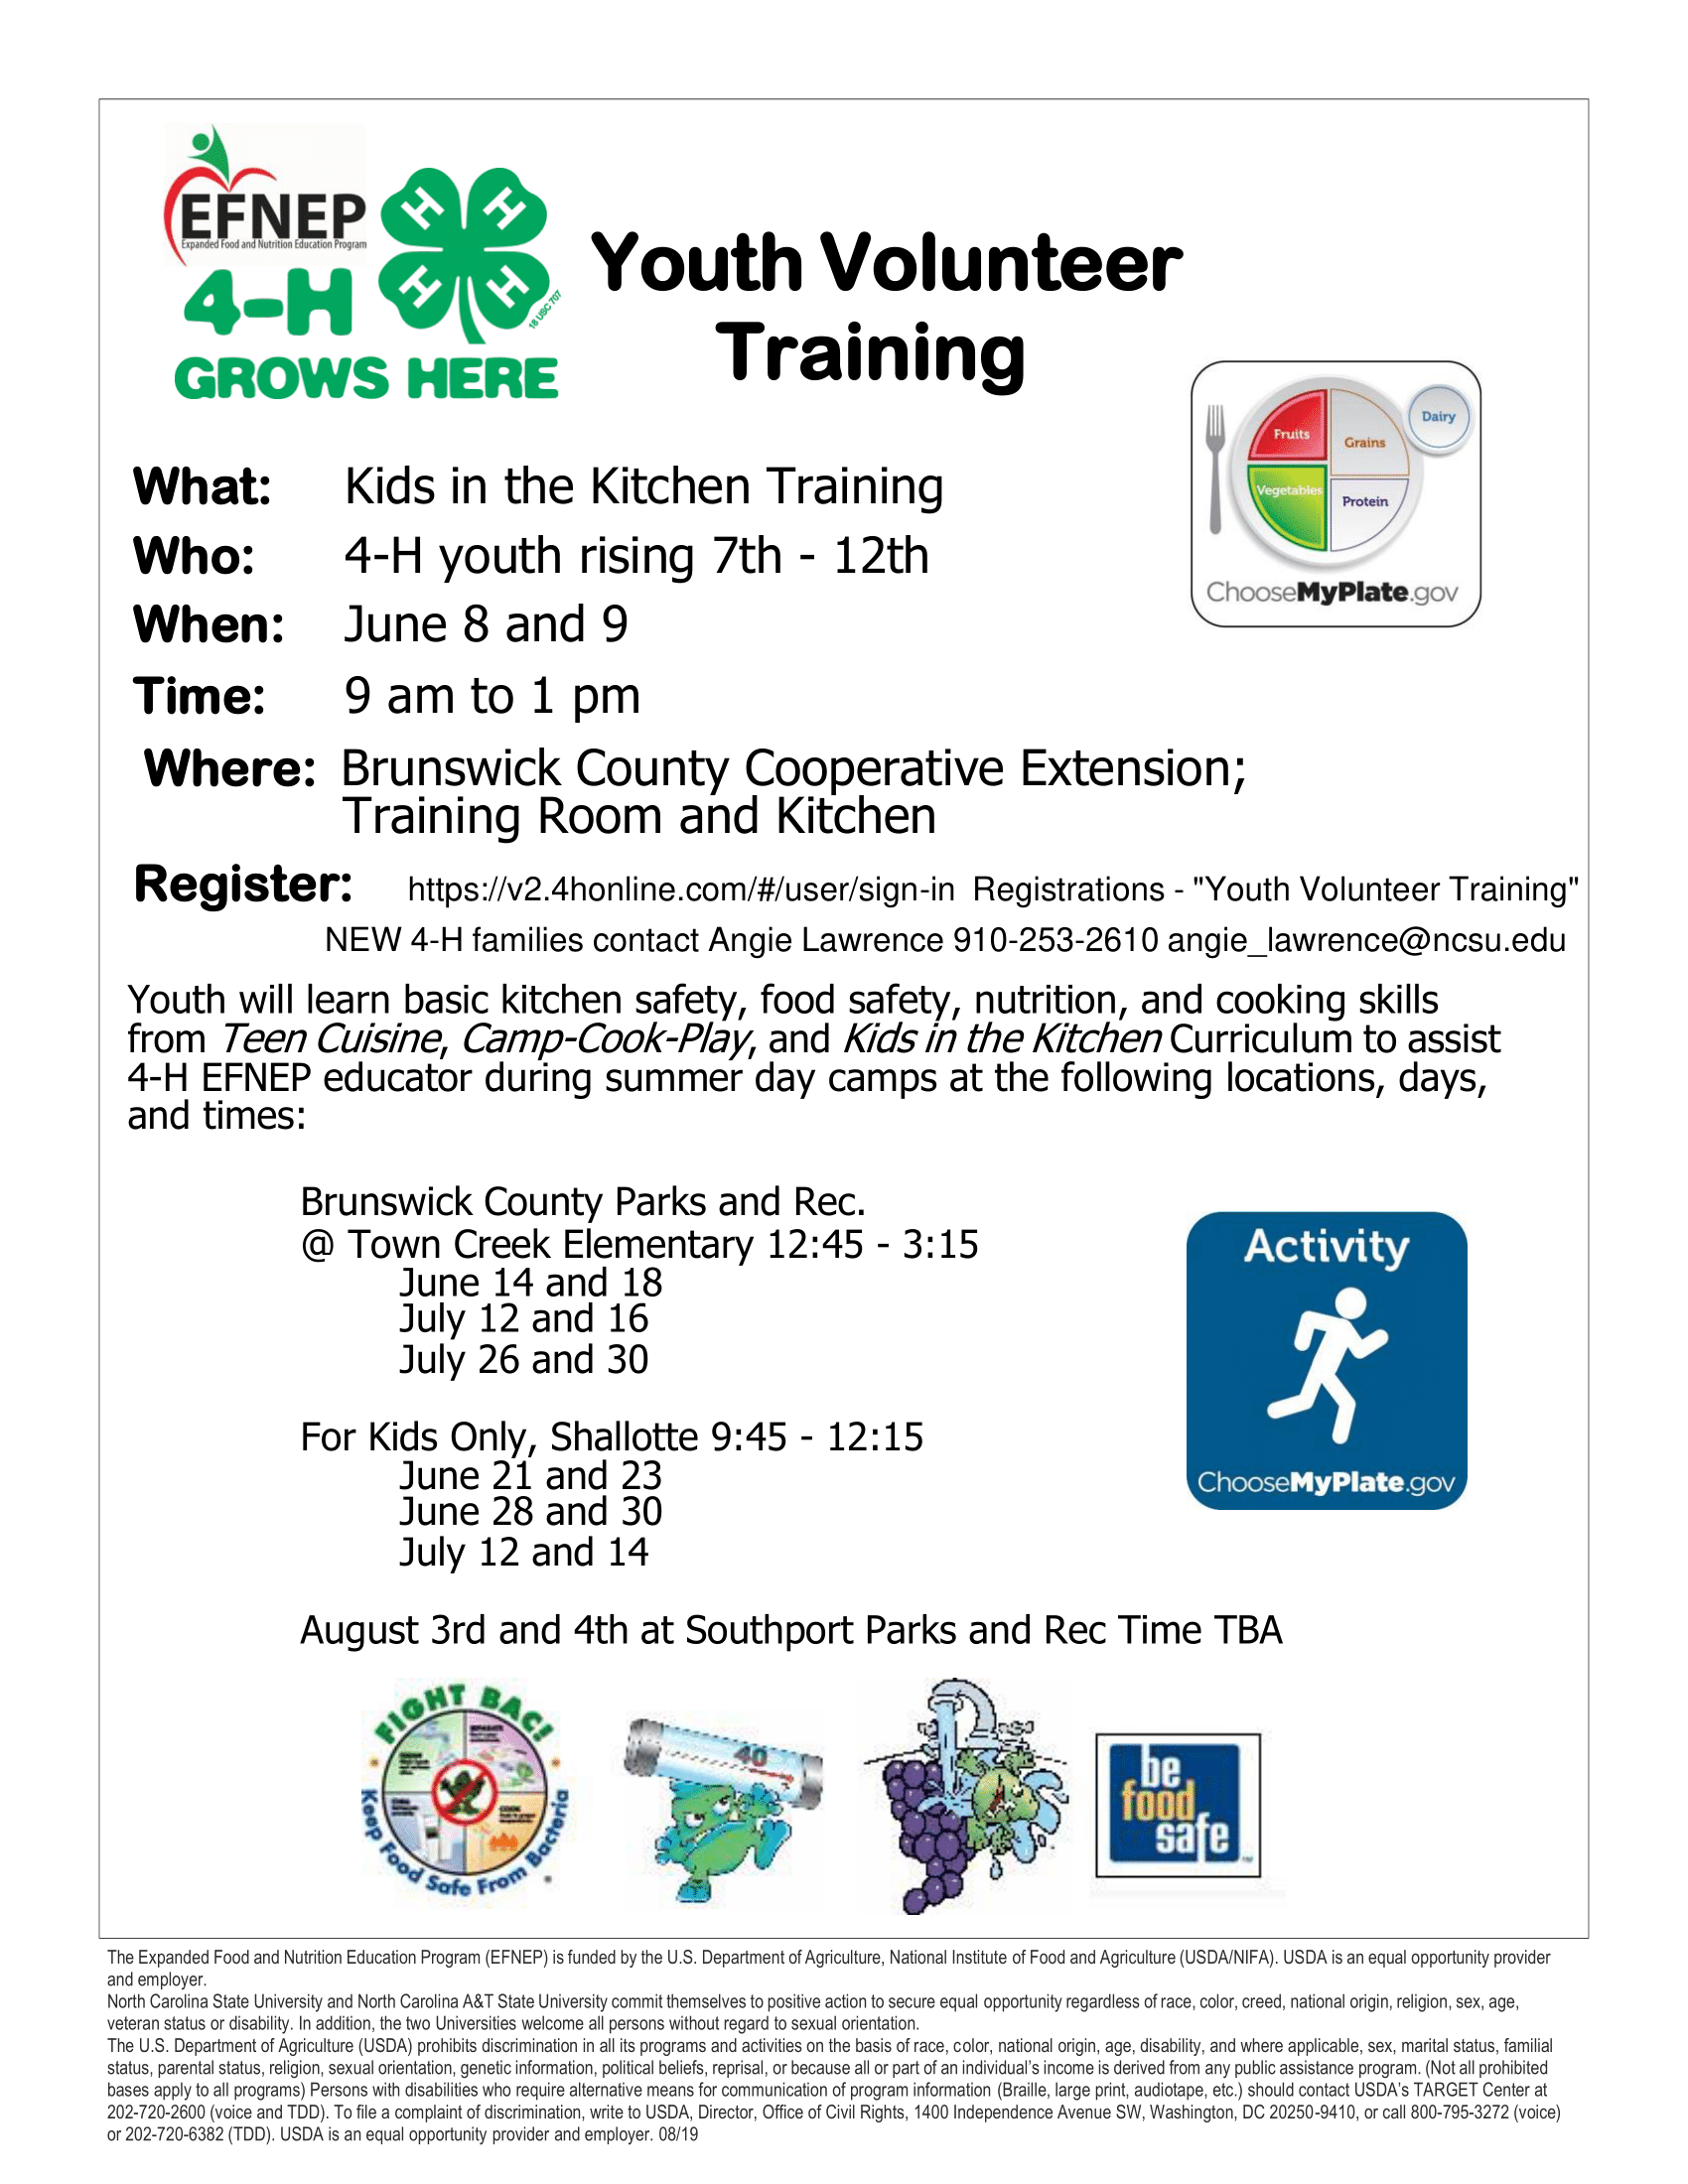 4-H Youth Volunteer Training Flyer. Rising 7th to 12th graders. June 8th and 9th at Brunswick County Cooperative Extension. Register at 4-H Online. Call or email Angie Lawrence for more information.